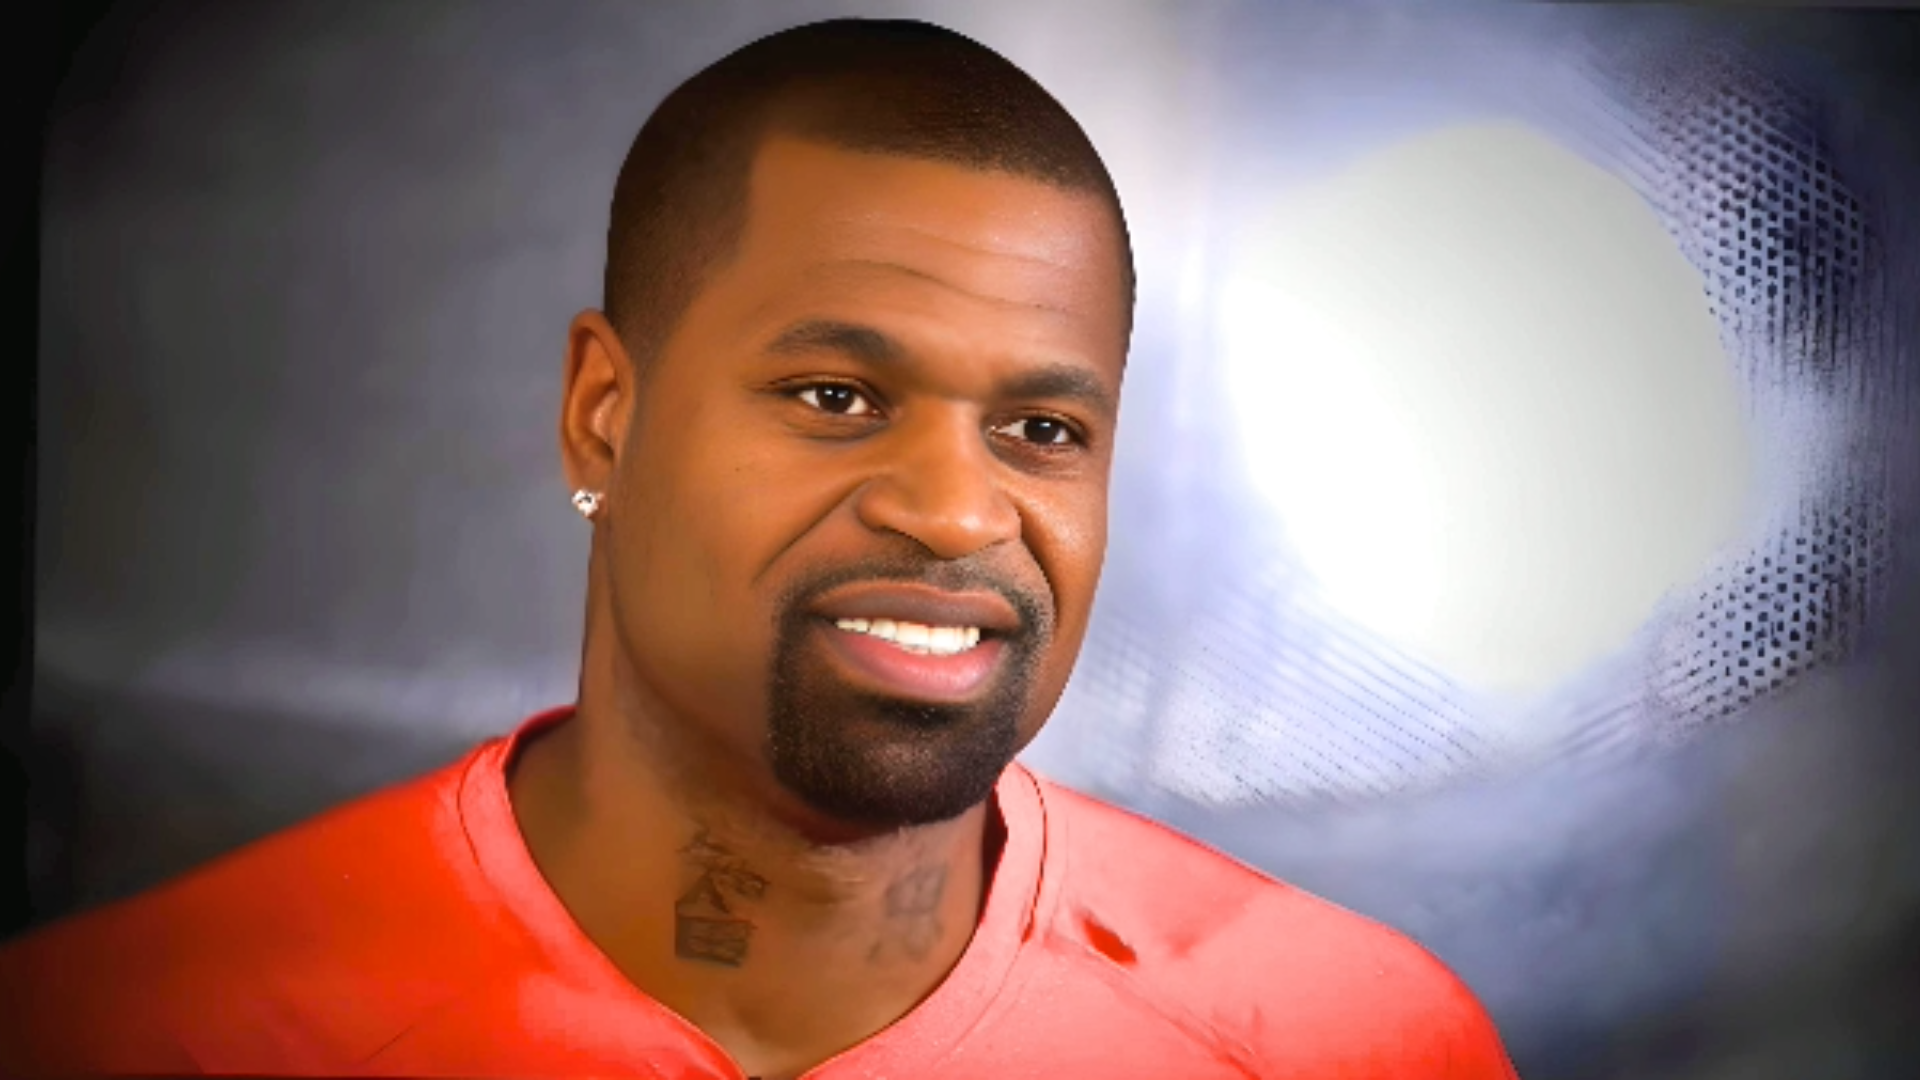 Former Pacer Stephen Jackson Net Worth, Smiling with Confidence wearing orange t-shirt